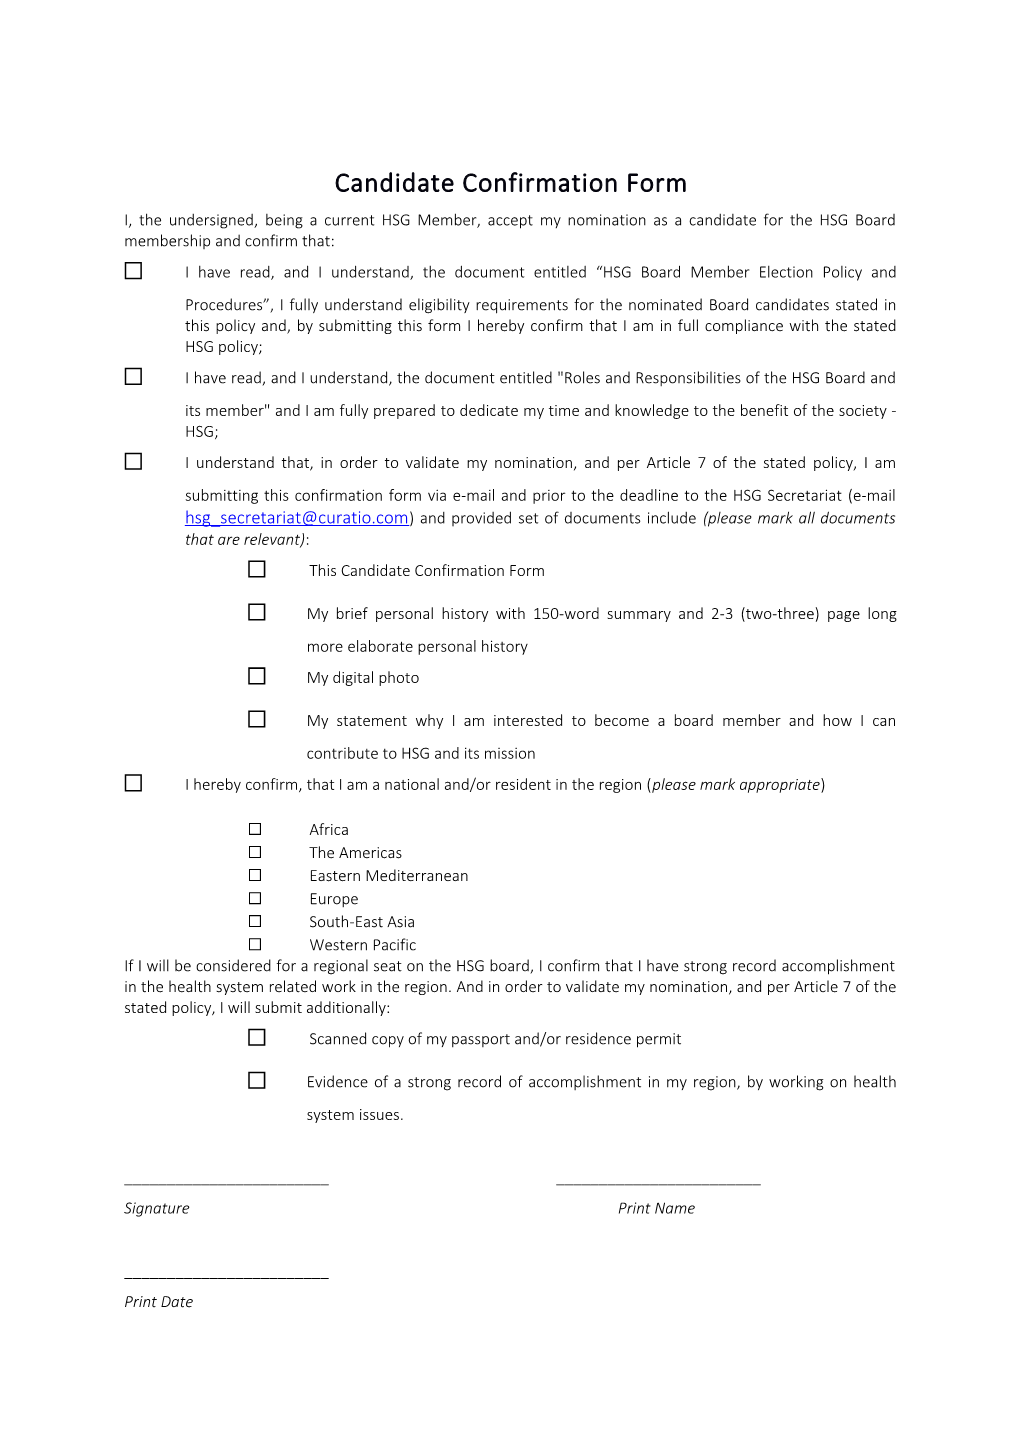 Candidate Confirmation Form